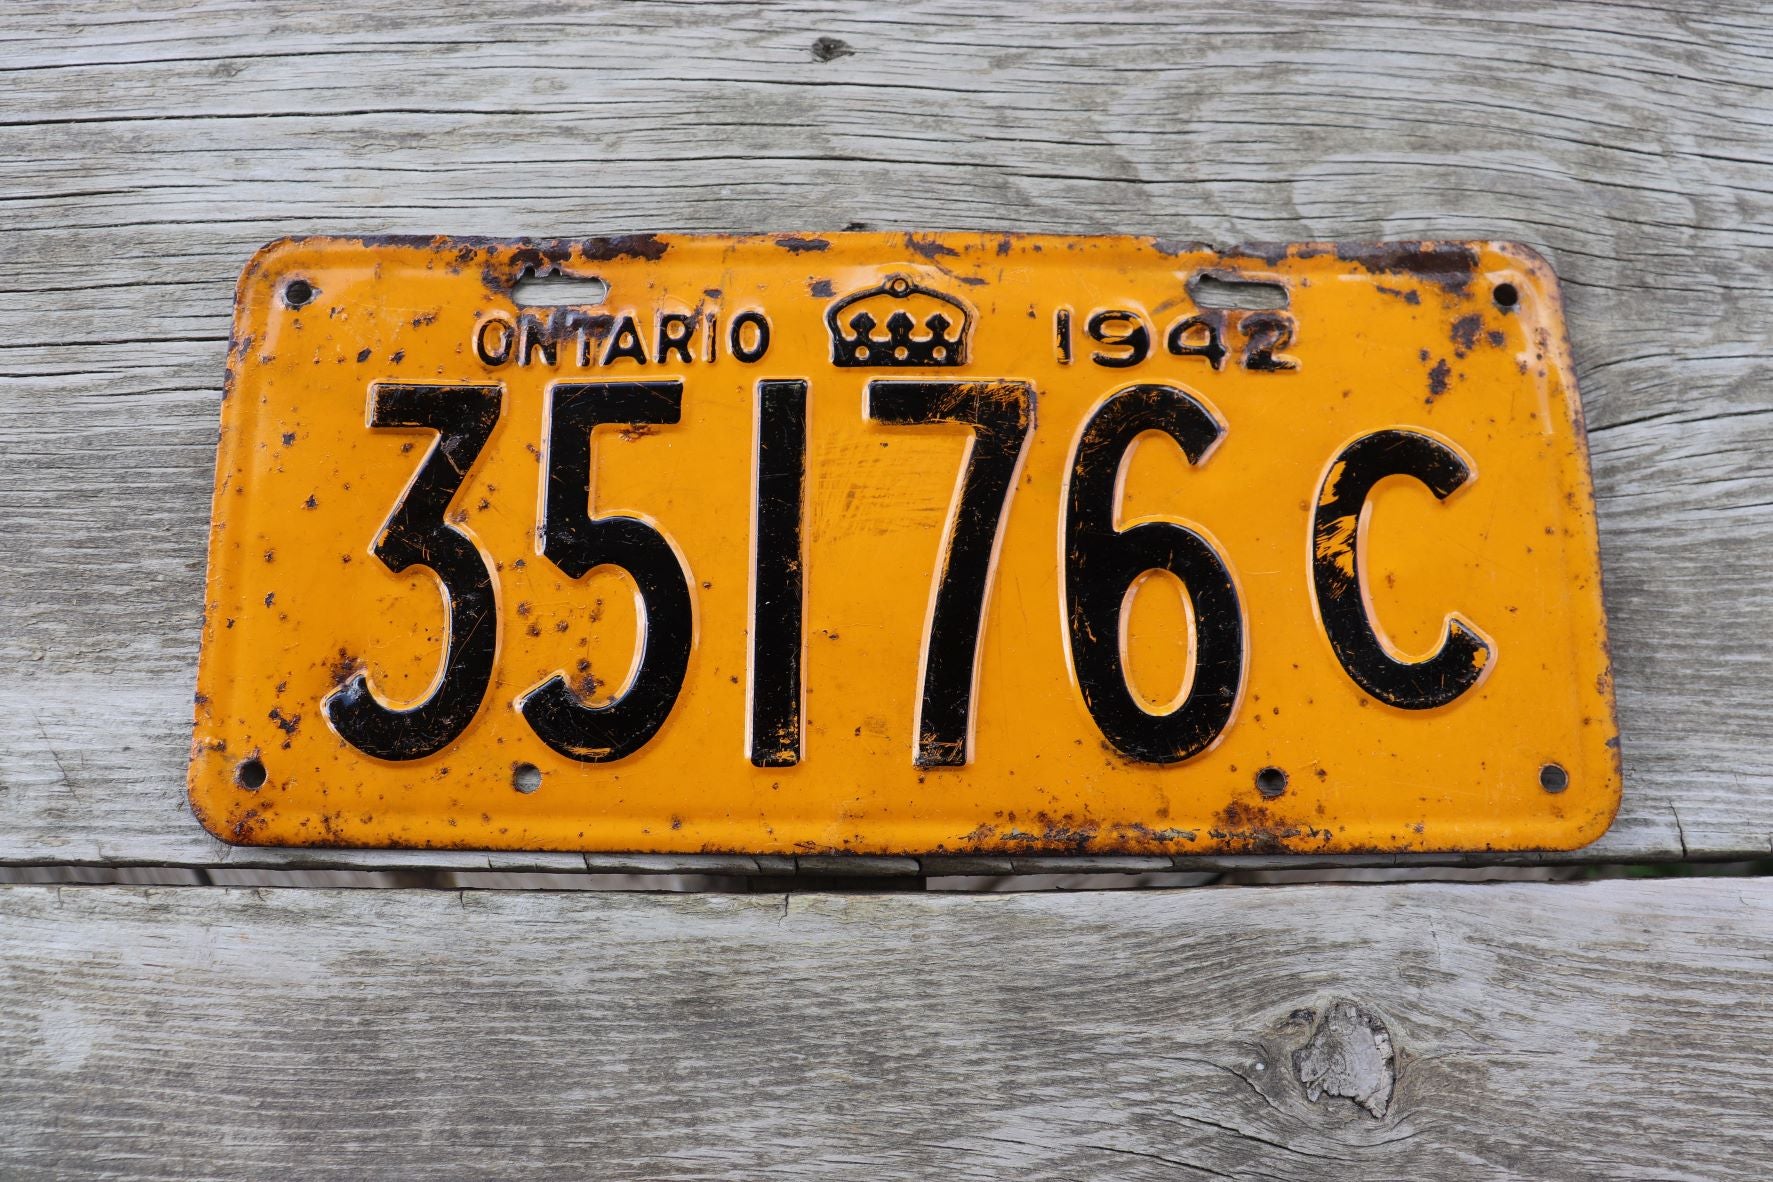 Ontario 1942 License Plate